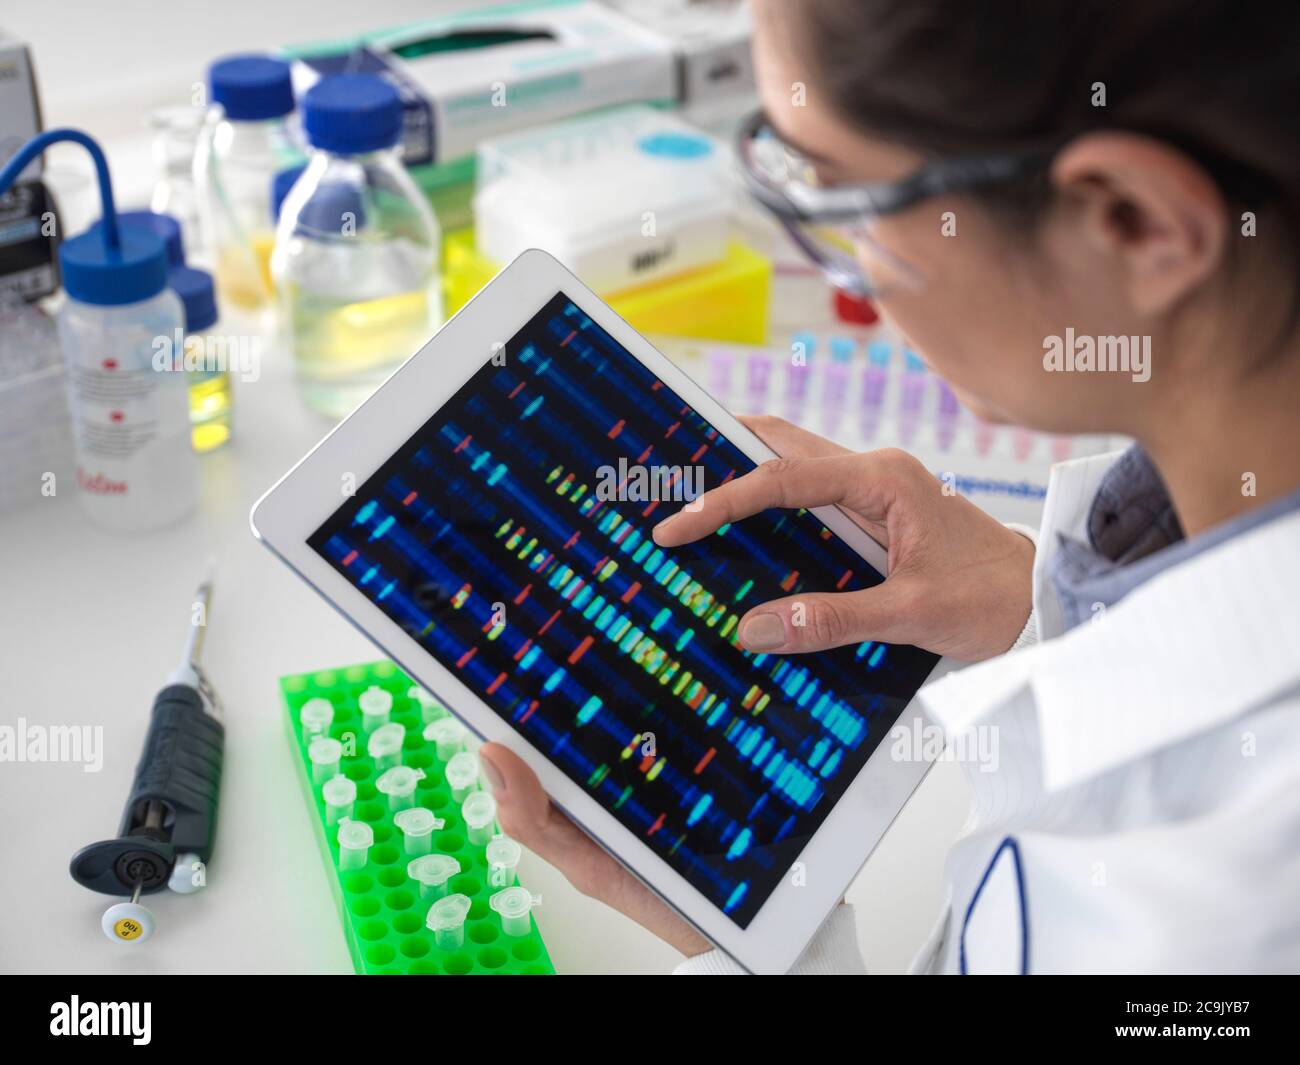 Scientist viewing DNA (deoxyribonucleic acid) profiles on a touch screen tablet during a genetic experiment. Stock Photo